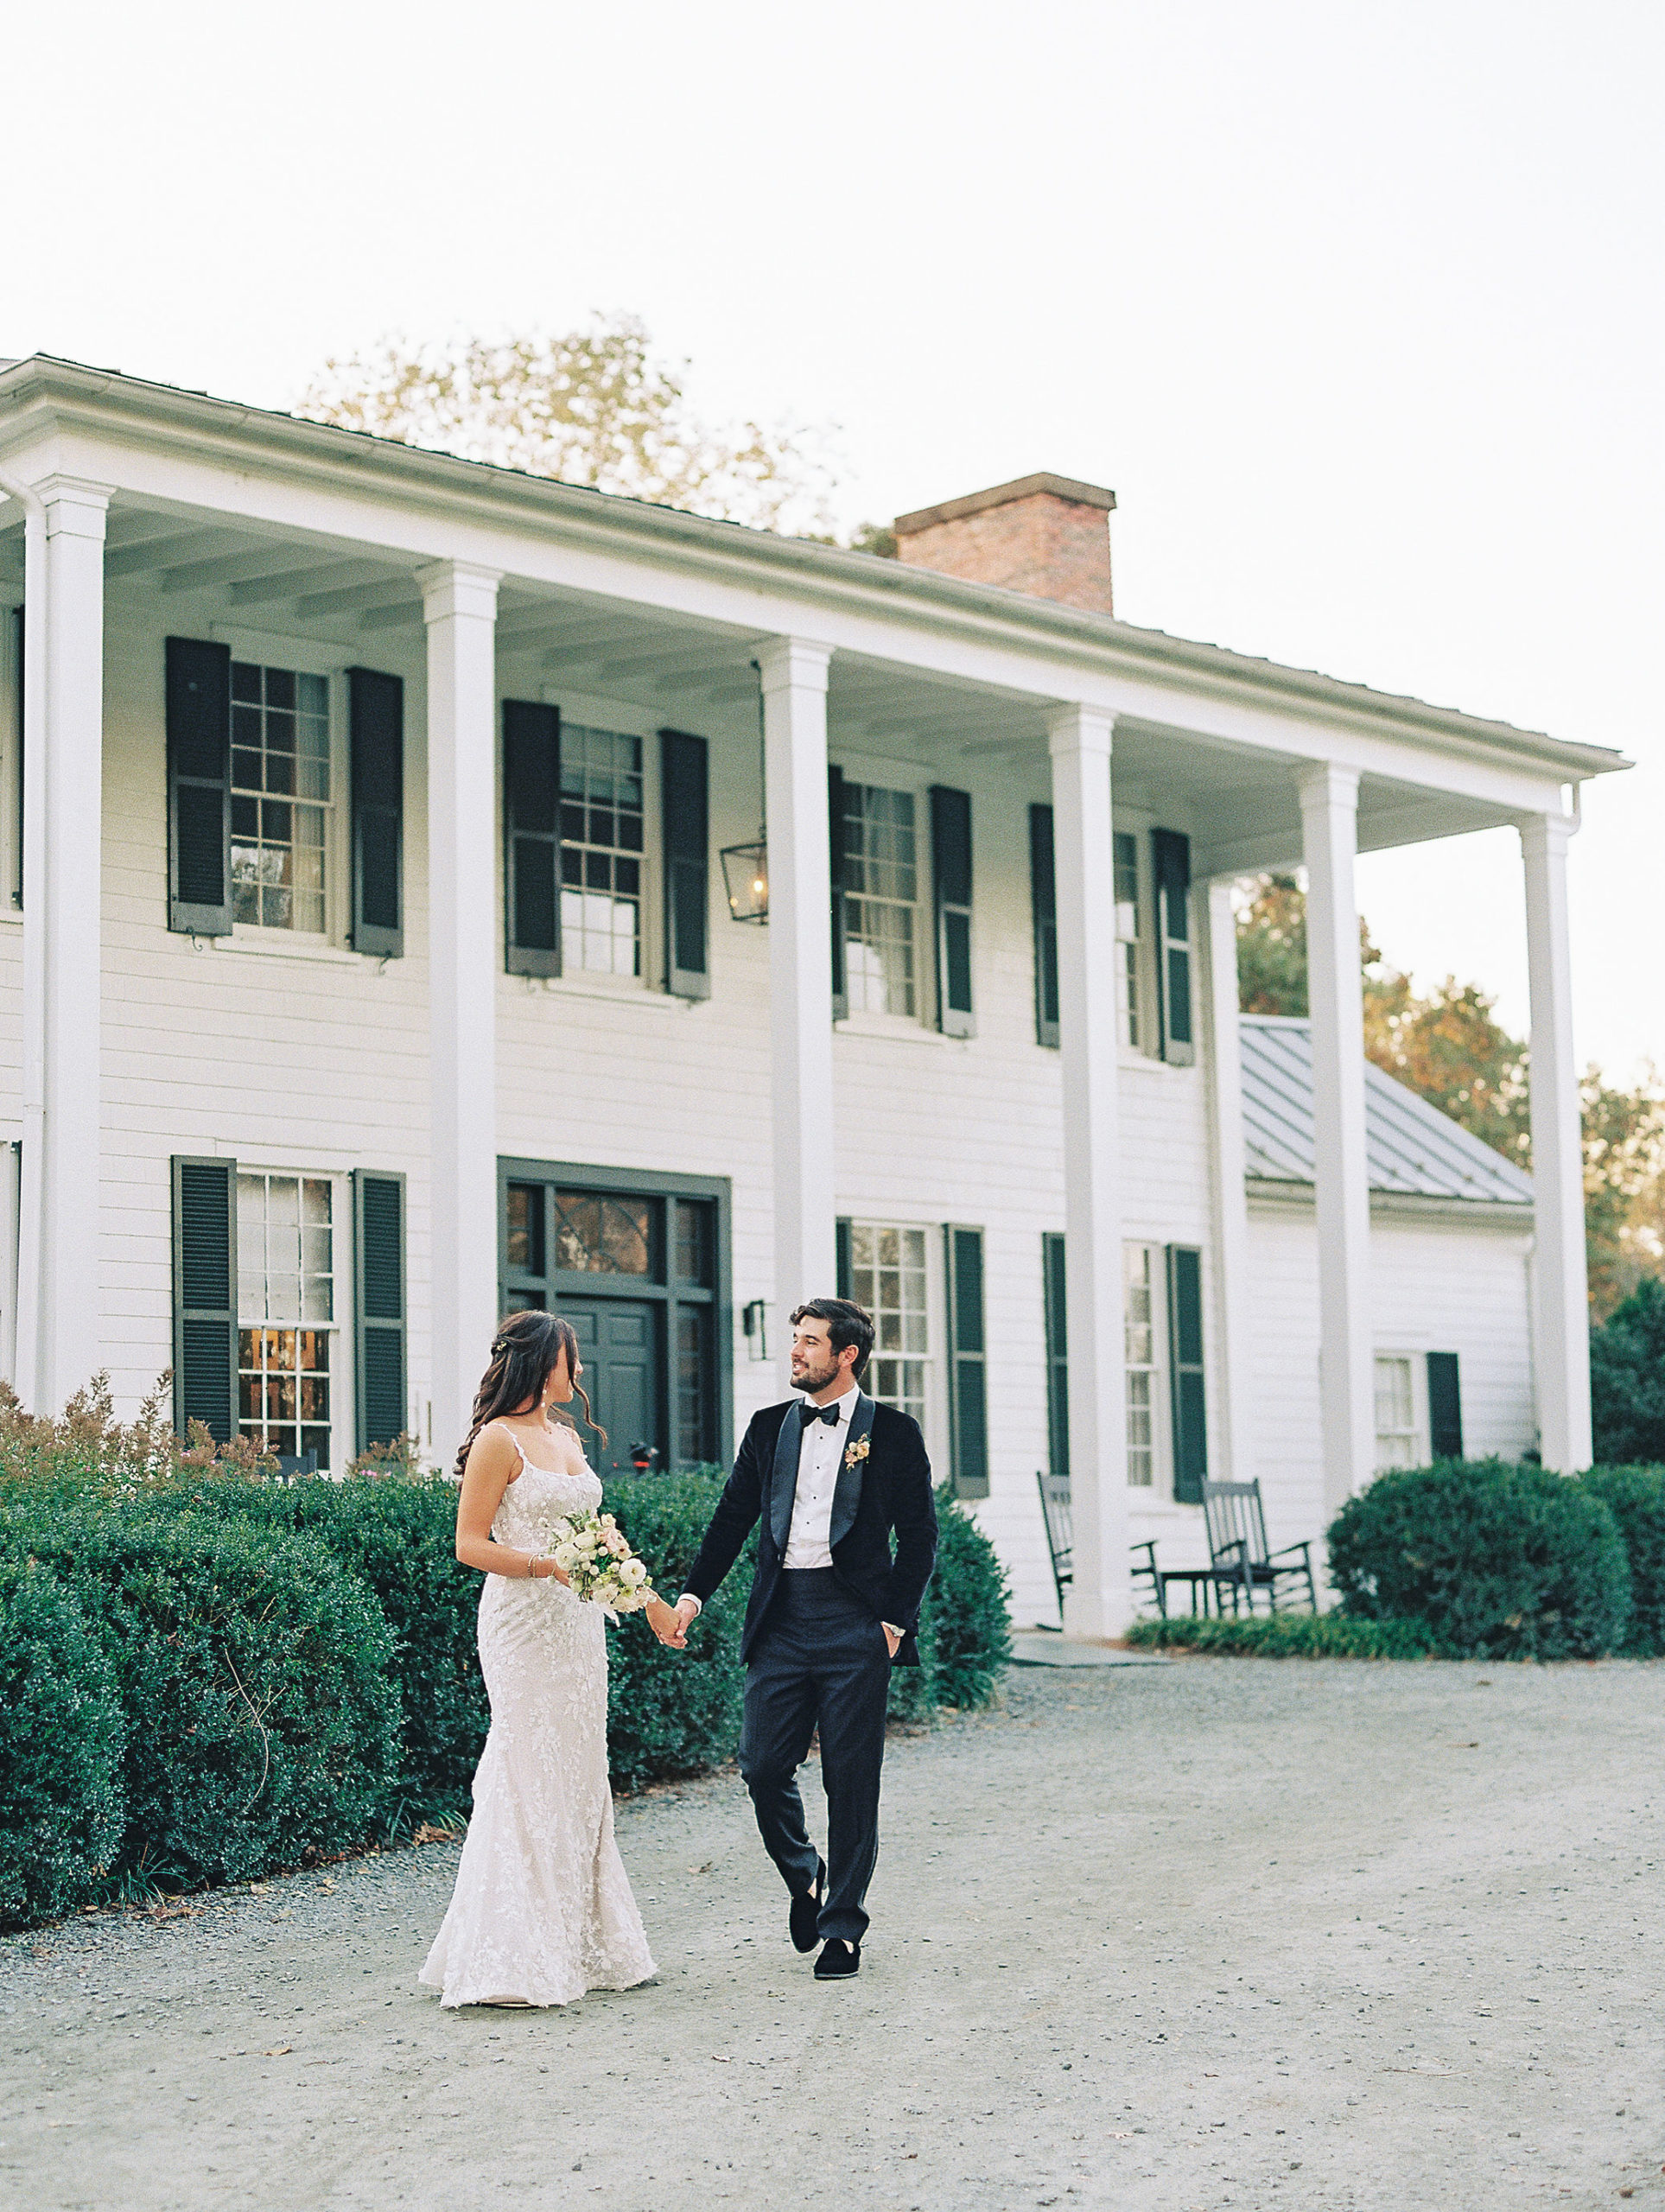 Bride and groom hold hands and in front of white house with columns and green shutter for Clifton wedding photography